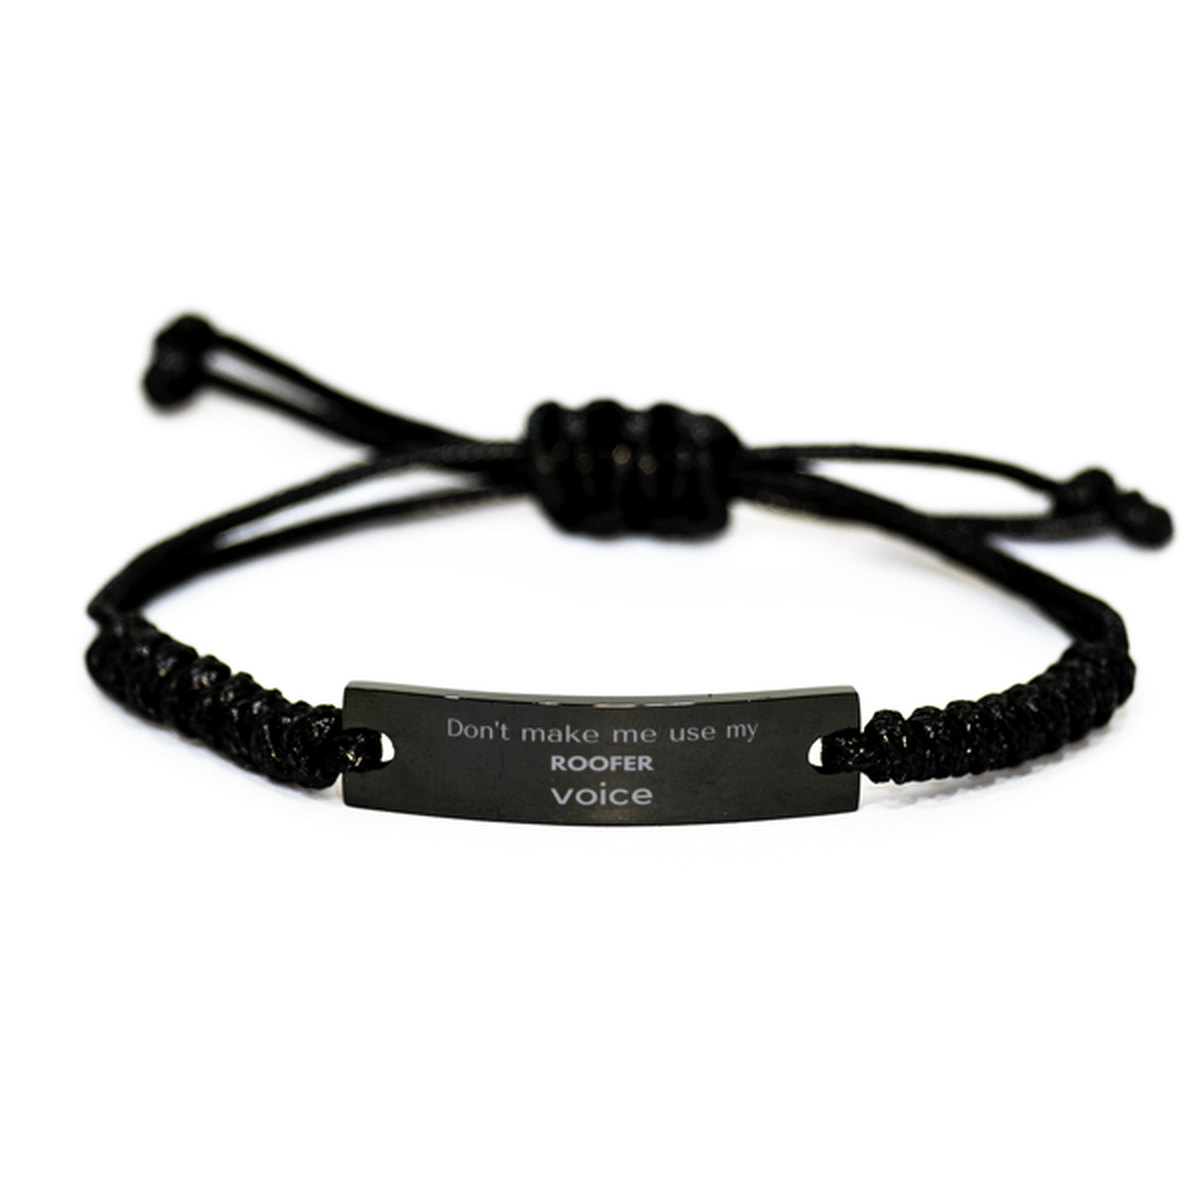 Don't make me use my Roofer voice, Sarcasm Roofer Gifts, Christmas Roofer Black Rope Bracelet Birthday Unique Gifts For Roofer Coworkers, Men, Women, Colleague, Friends